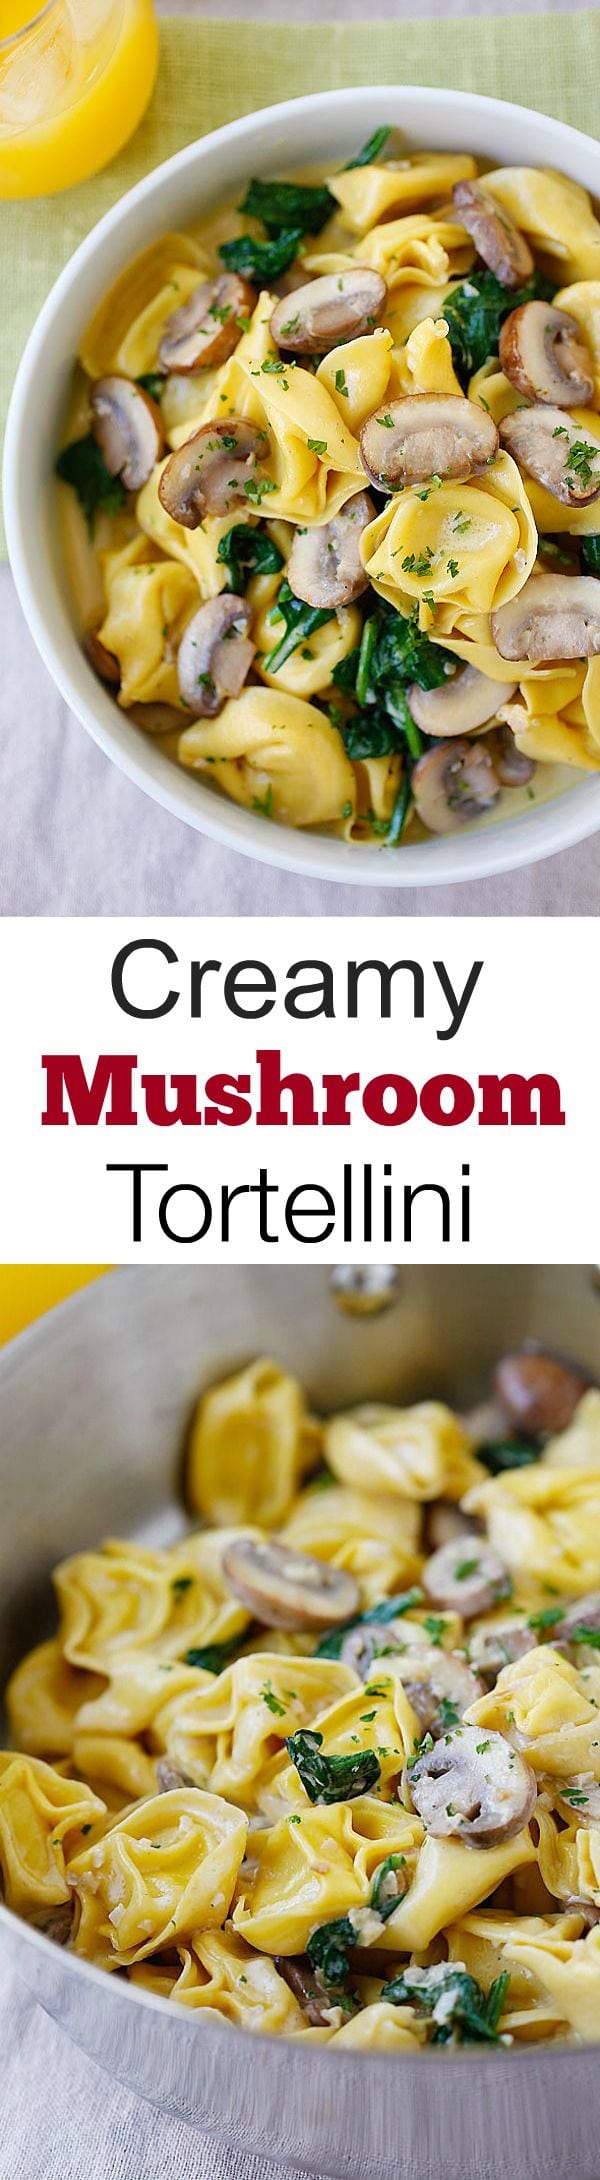 Creamy Mushroom Tortellini - the creamiest and most delicious tortellini recipe with rich buttery mushroom sauce. Quick, easy and budget-friendly!! | rasamalaysia.com